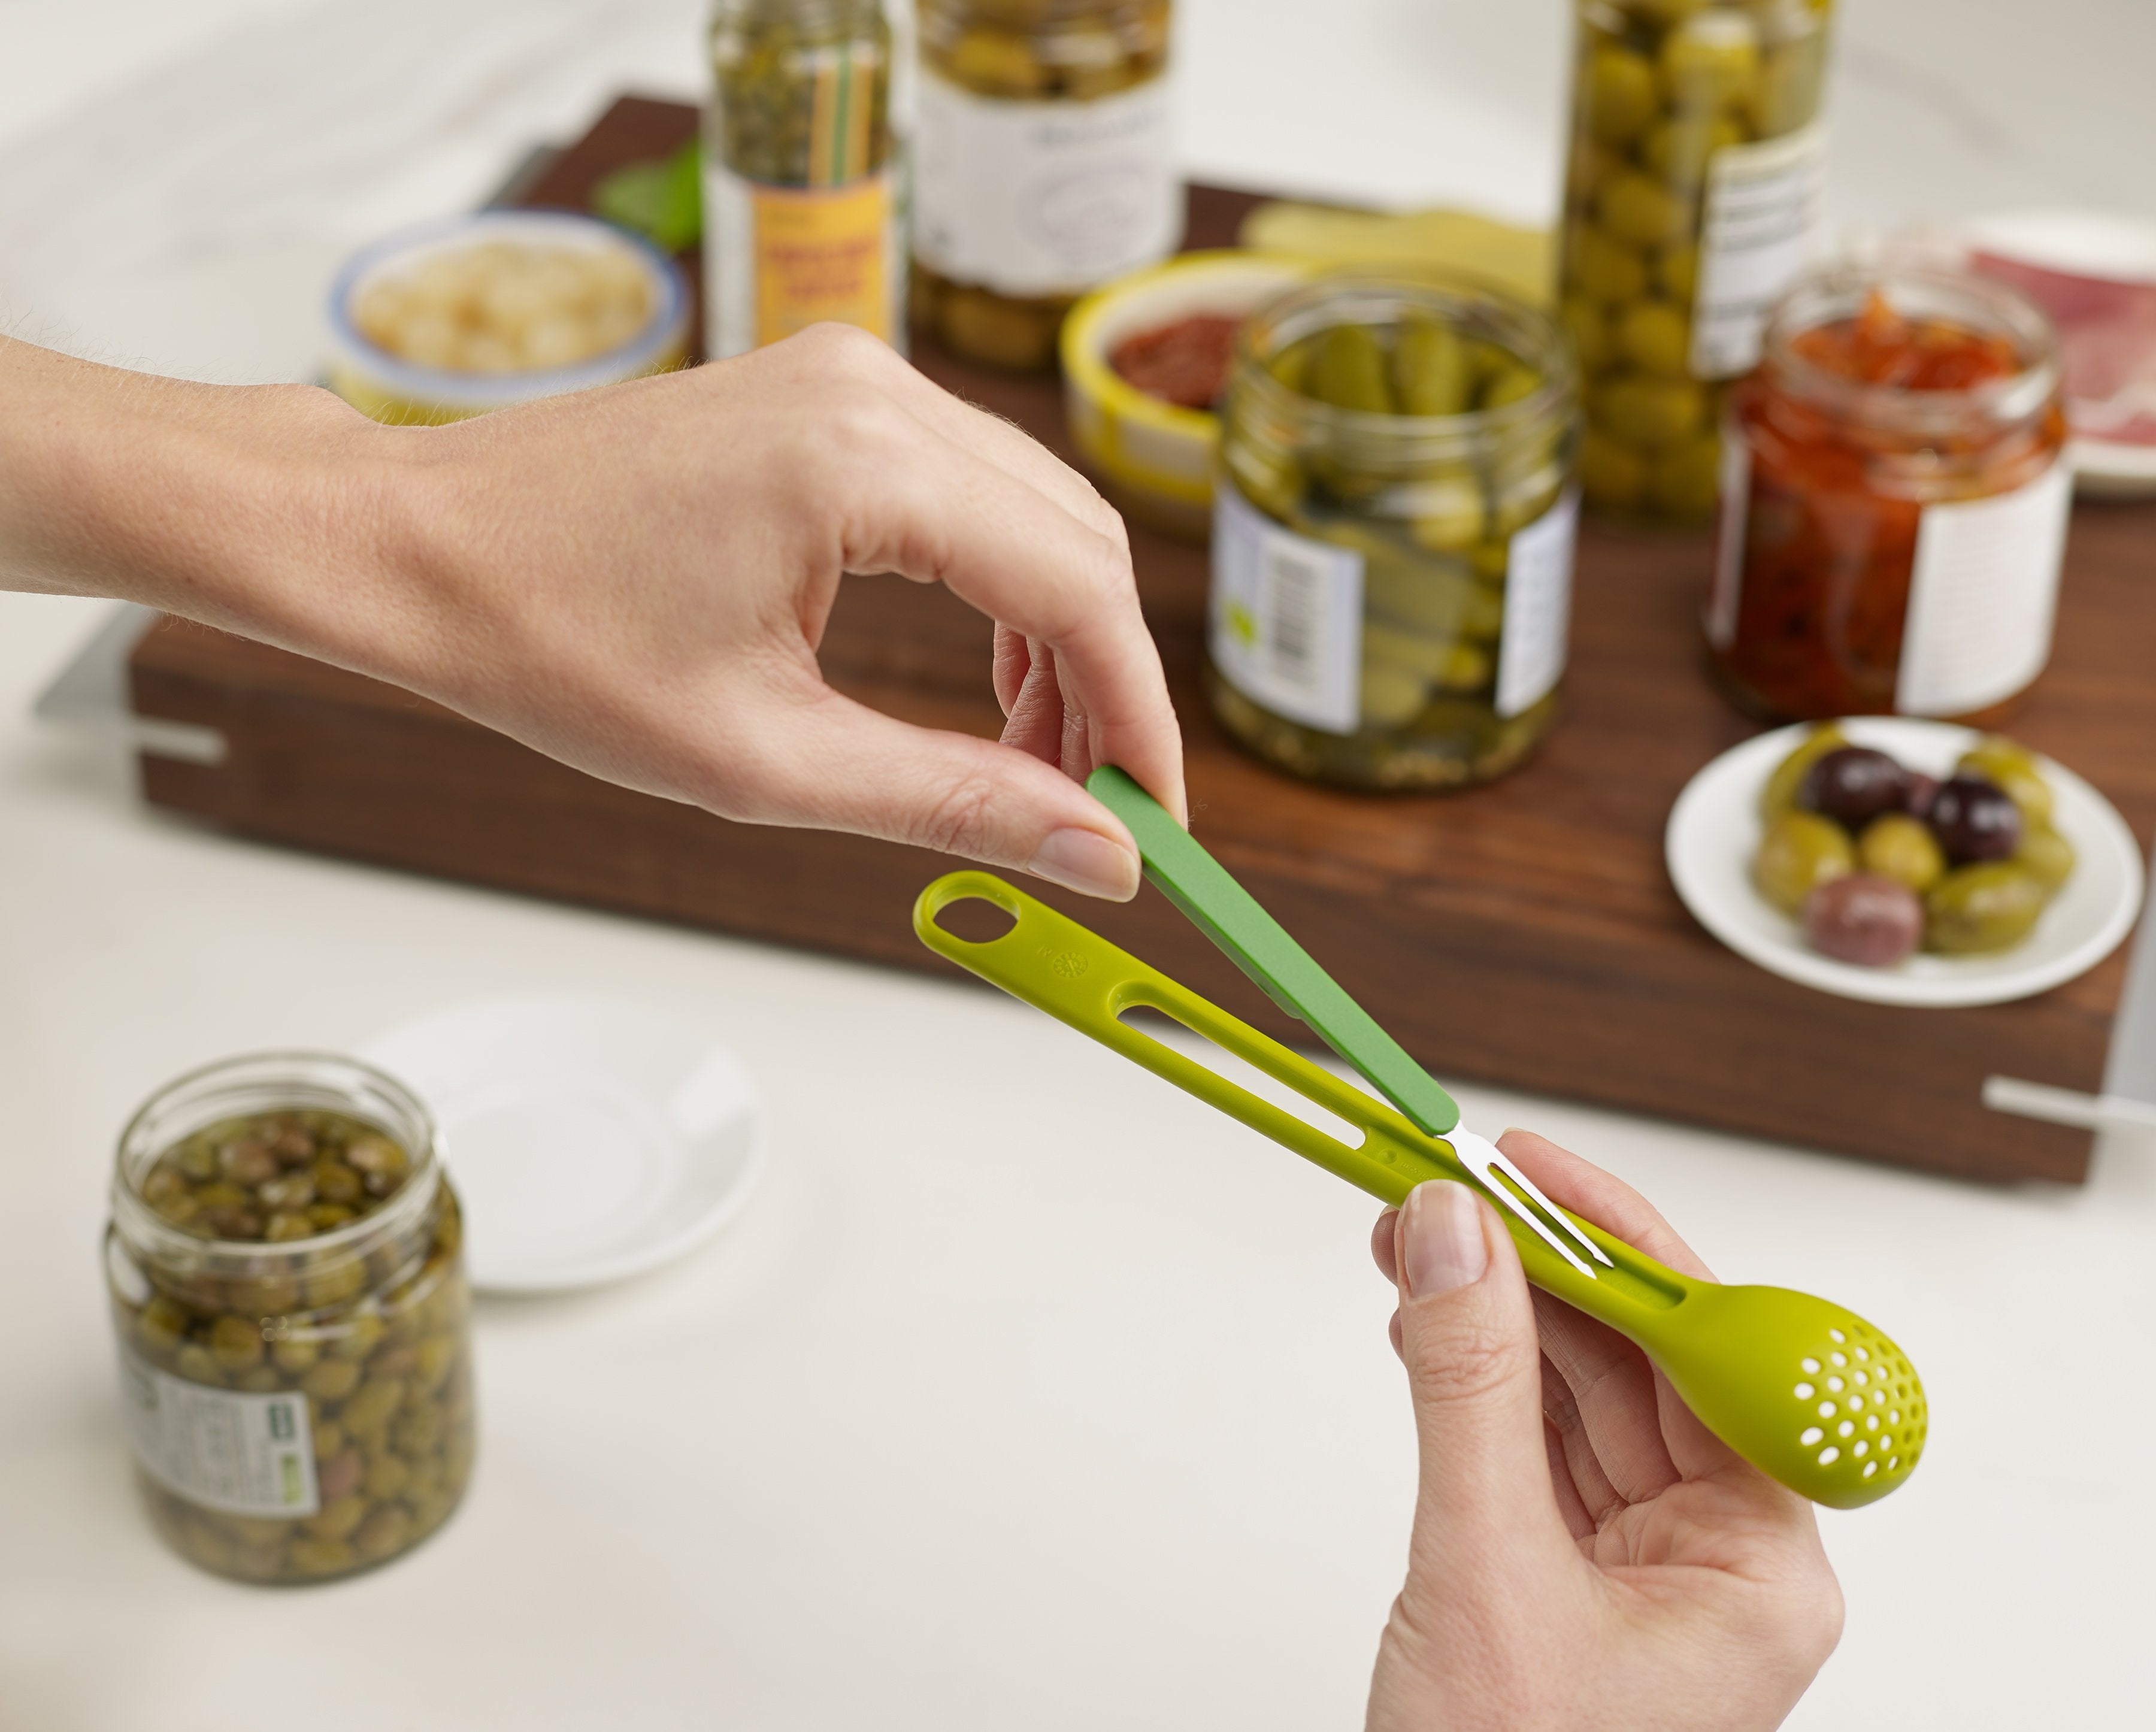 BEON.COM.AU  This handy 2-in-1 utensil makes serving antipasti easy and mess-free.  Ideal for removing olives, capers and pickles from jars Long handled slotted spoon ideal for scooping and draining from tall jars Sharp stainless-steel fork ideal for removing pickles Fork clips neatly into spoon handle for c... Joseph Joseph at BEON.COM.AU